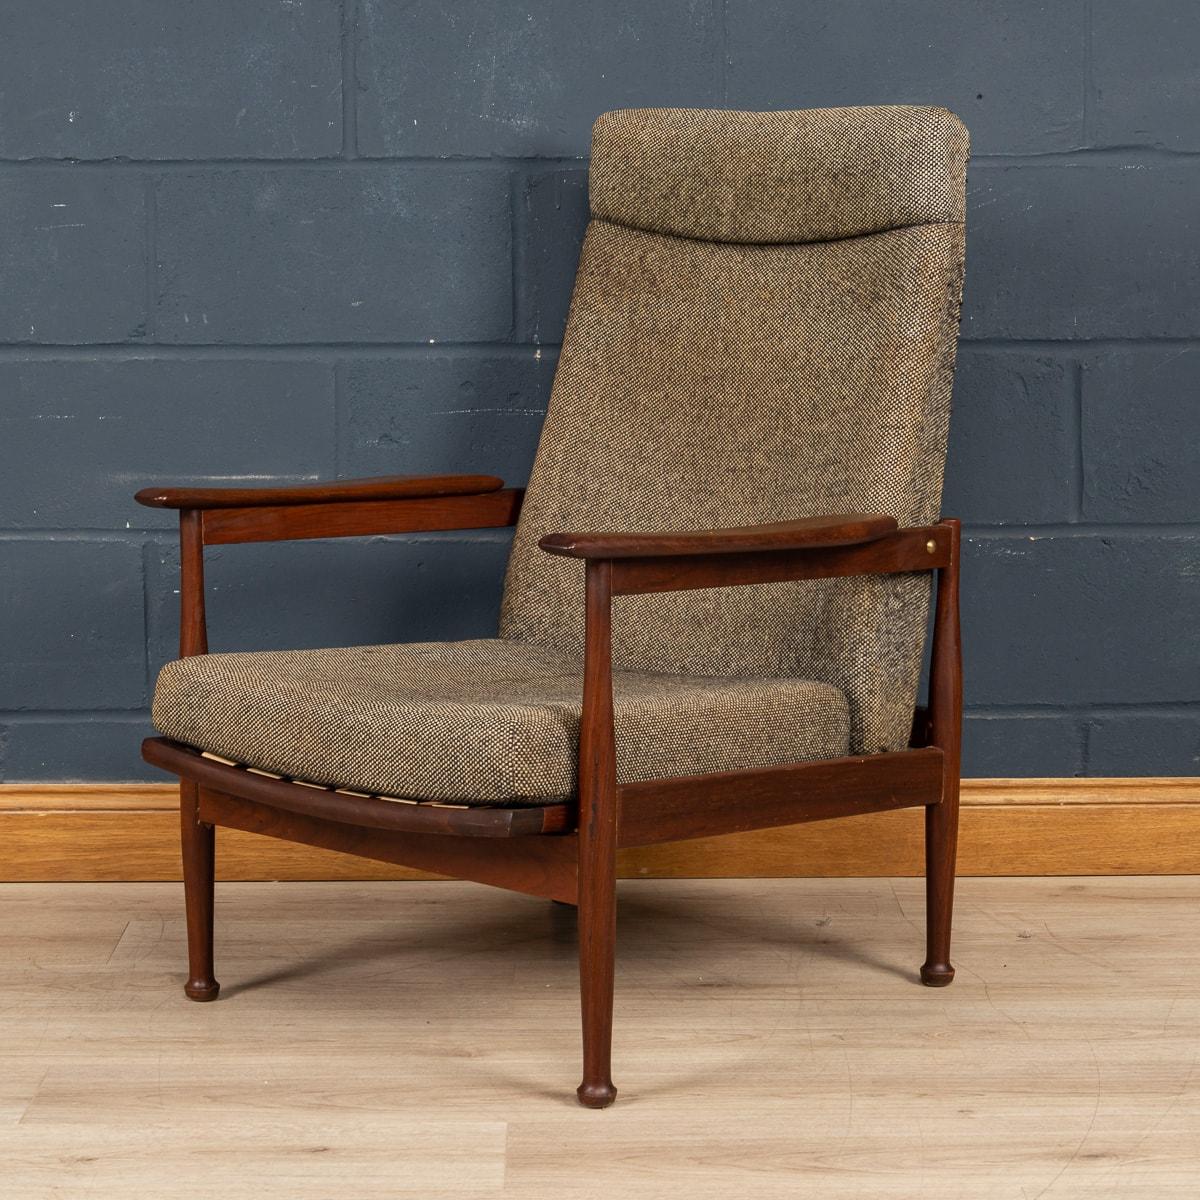 A mid century 'Manhattan' reclining armchair by Guy Rogers c1960's. A solid teak afromosia frame with a high backrest shaped arms and stands on turned tapering legs with 3 seating positions that is set from under the seat cushion. The chair is in